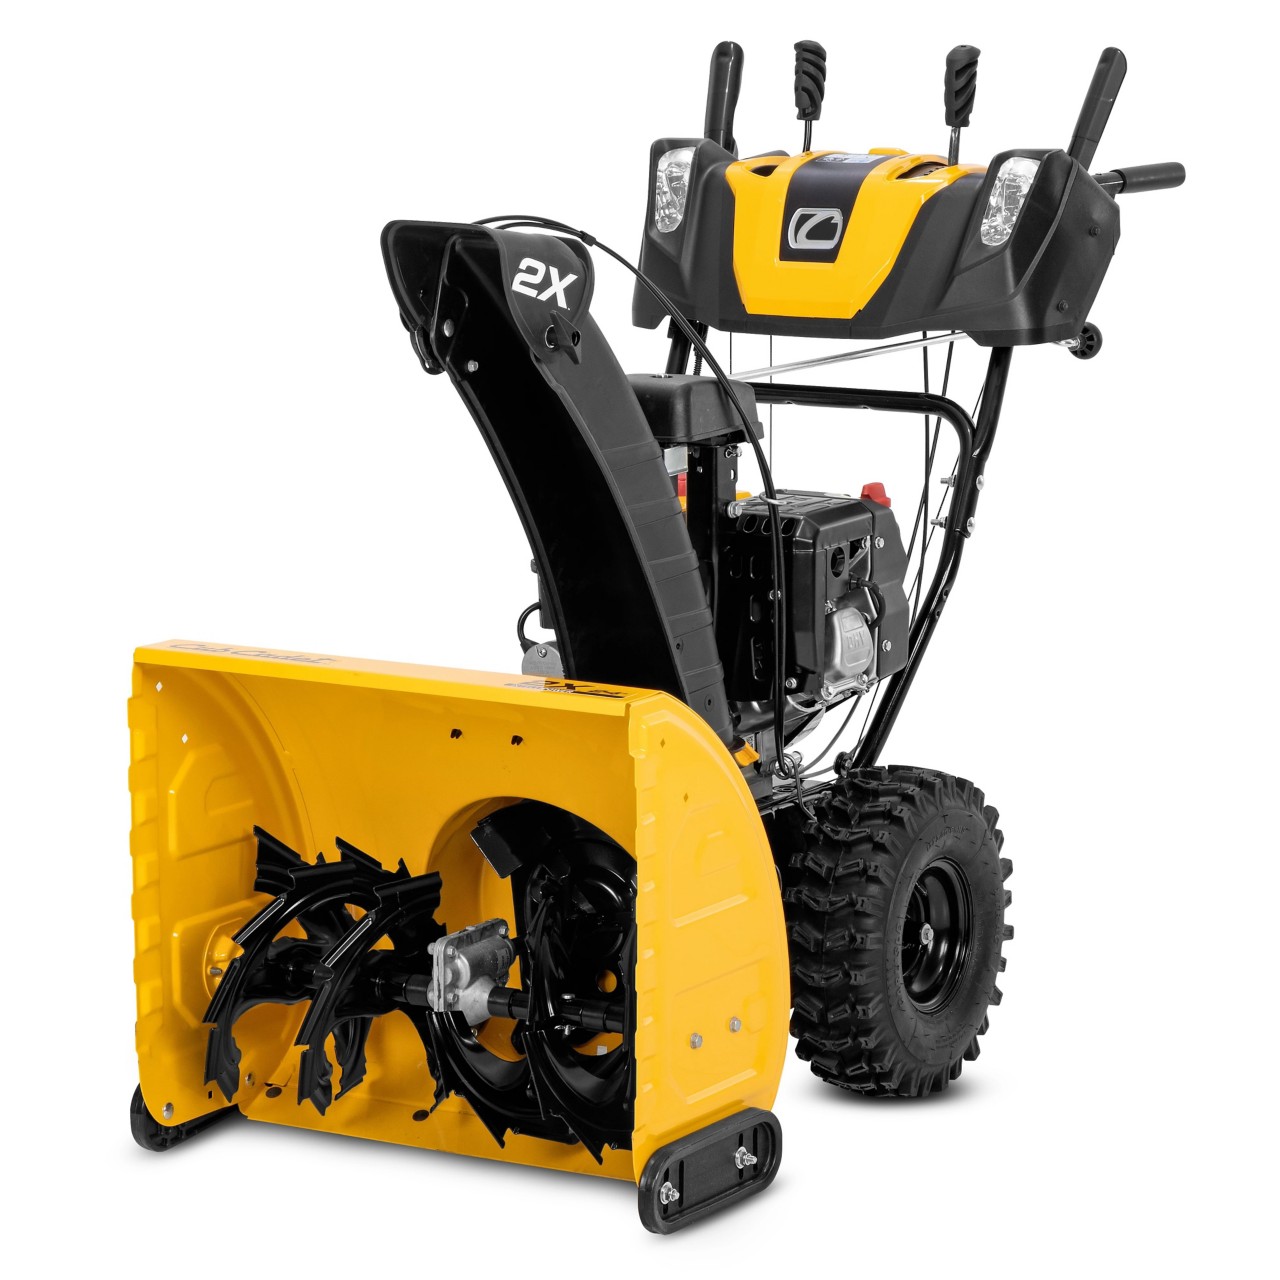 Image of snow blower that links to all snow blowers and snow removal catalog.